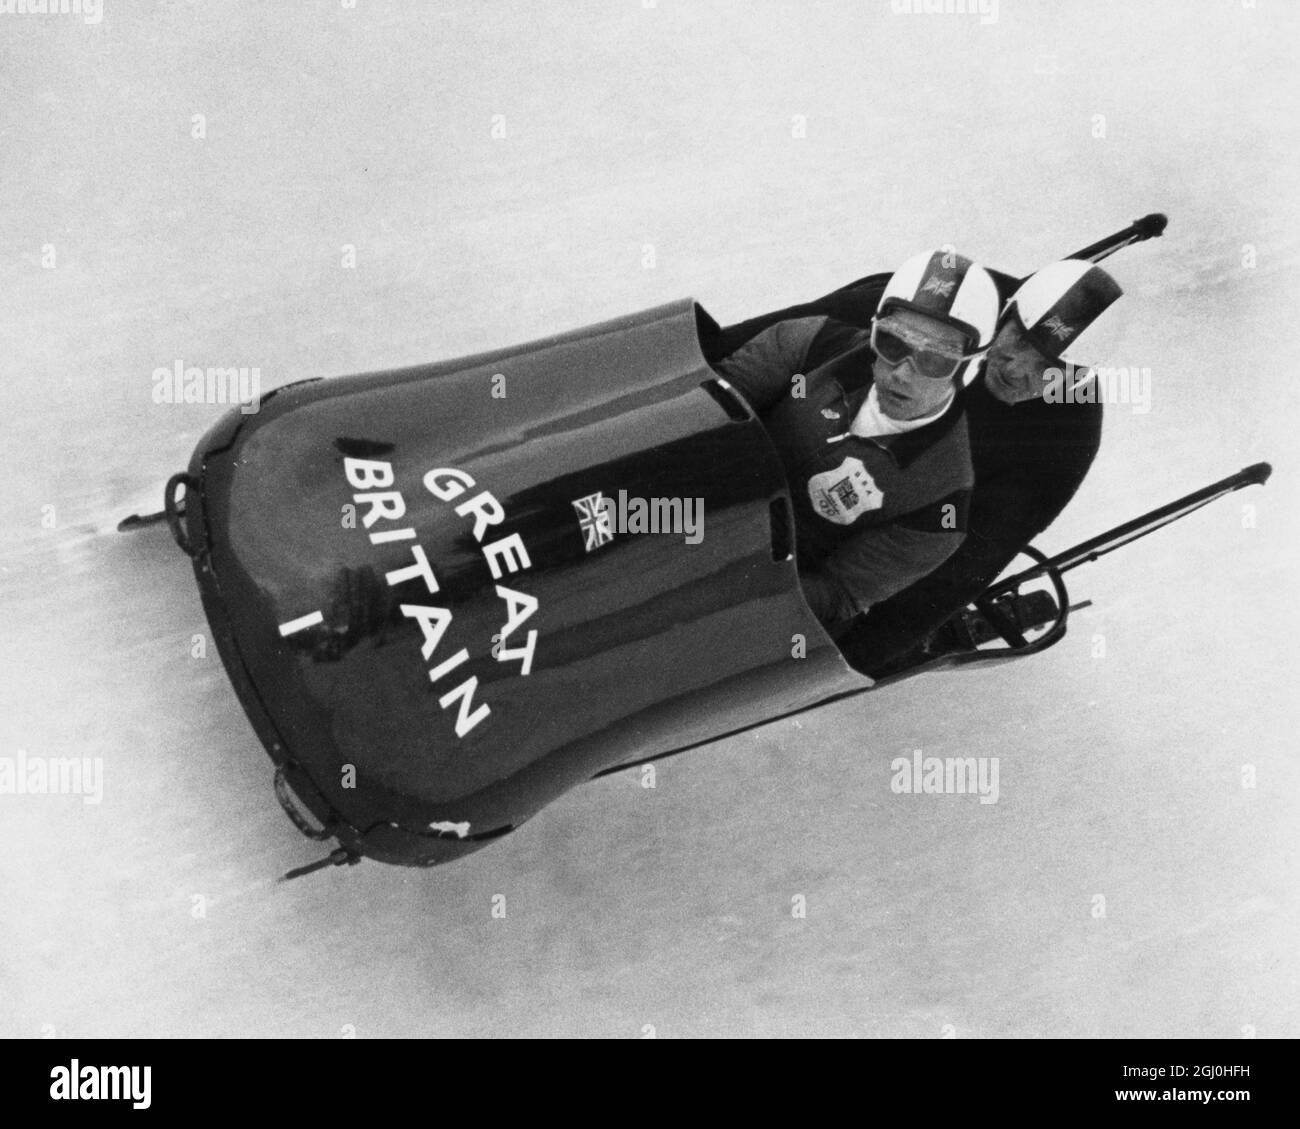 1964 Winter Olympic Games - Innsbruck, Austria Britain's No. 1 team Antony Nash (pilot) and Robin Dixon hurling down the bob run at Igls when the team won a gold medal for Britain - Britain's first gold medal in the Winter Olympics for 12 years. Britain's last gold success was by Jeanette Altwegg in the women's figure skating.- 3 February 1964 ©TopFoto Stock Photo